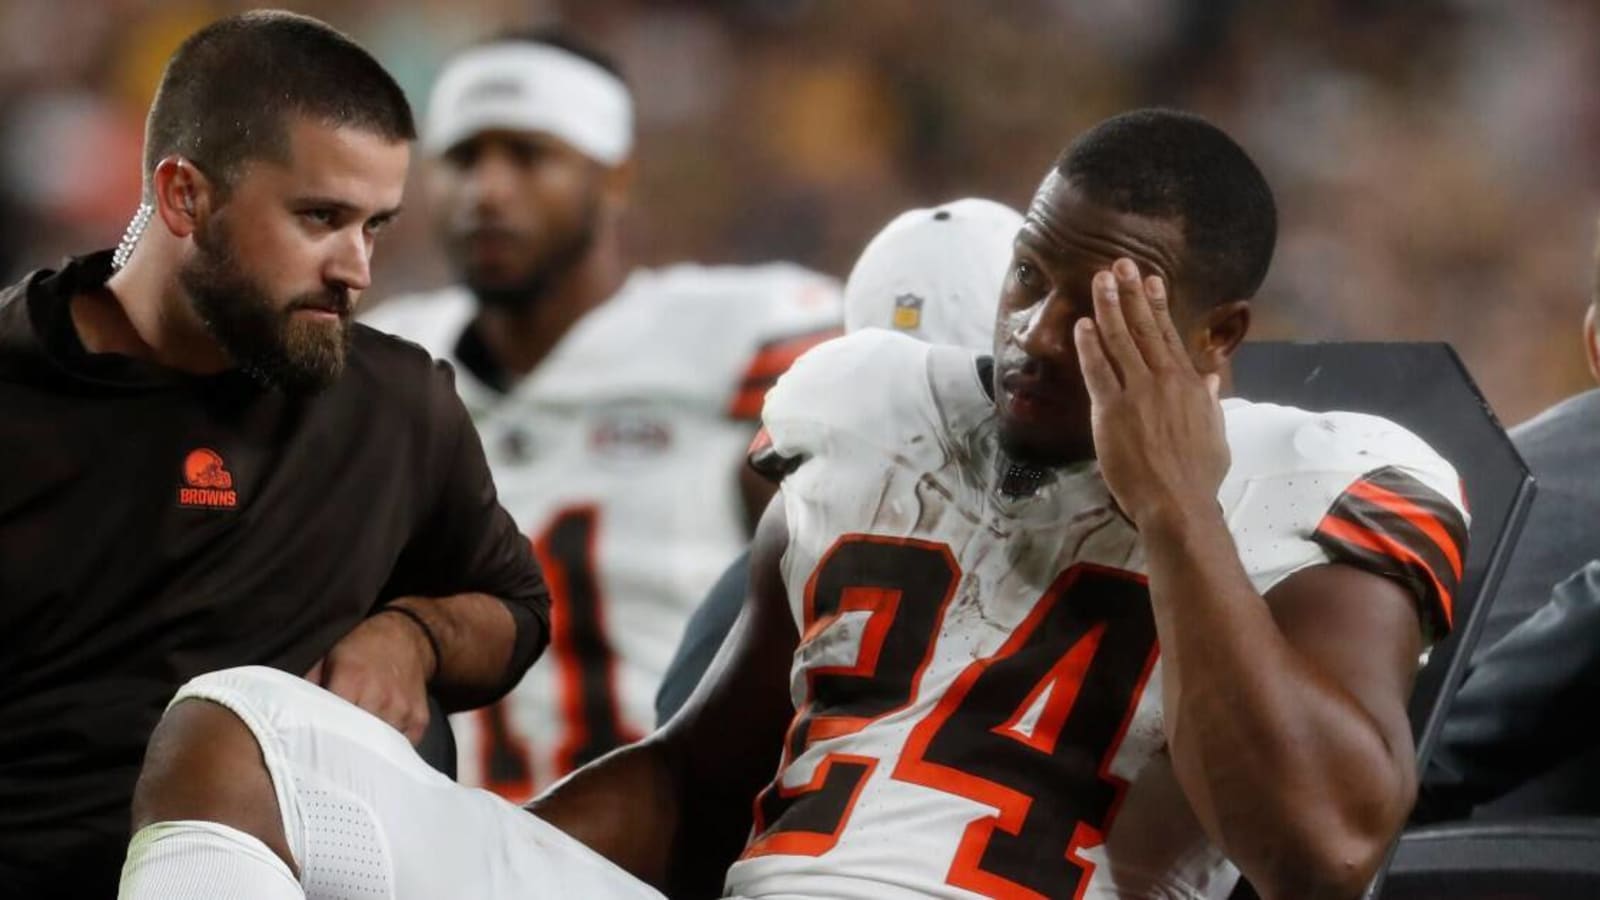 Nick Chubb may need two surgeries to address knee injury, per report